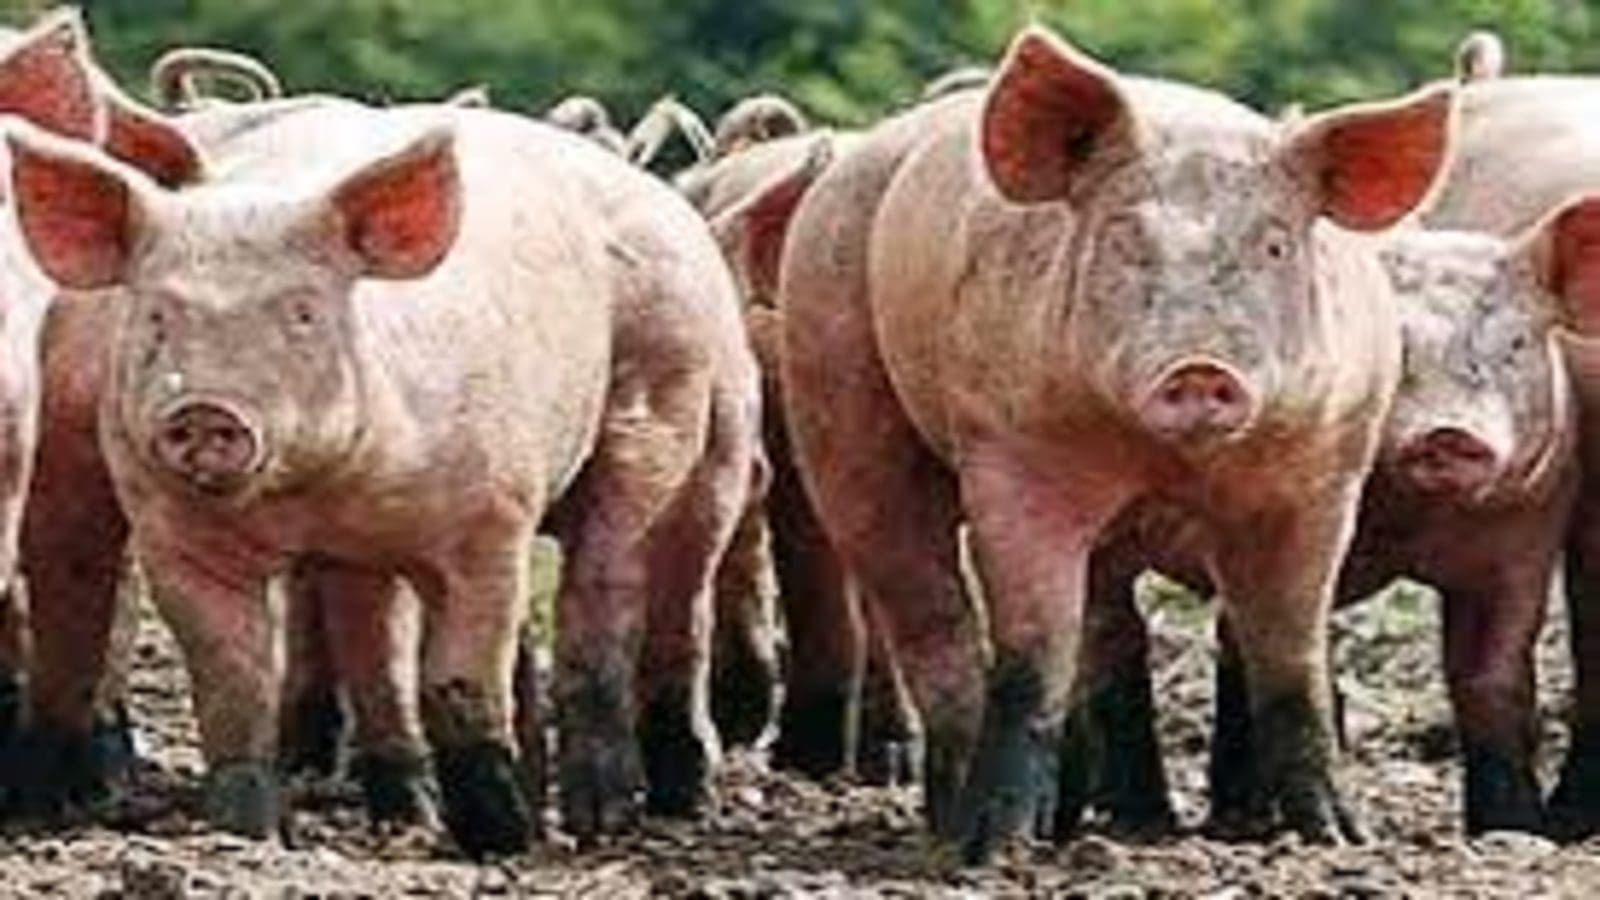 First-of-its-kind pig buffer zone launched in Zambia to promote safe pig production